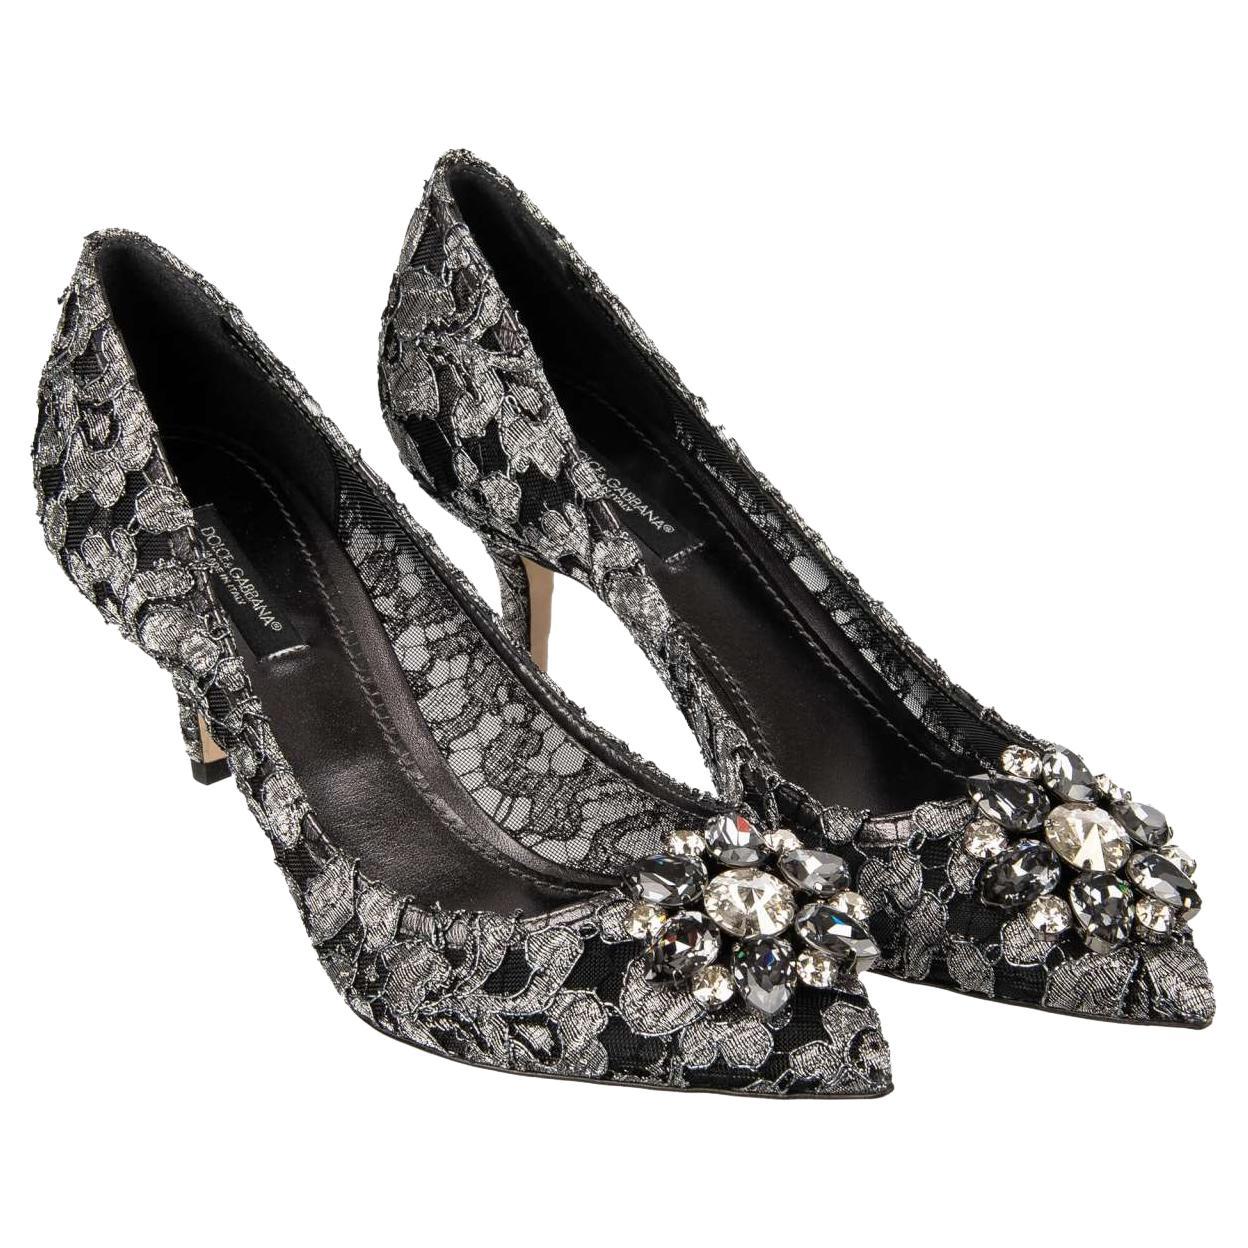 D&G Taormina Lace Pumps BELLUCCI with Crystal Brooch Silver Black EUR 36 For Sale